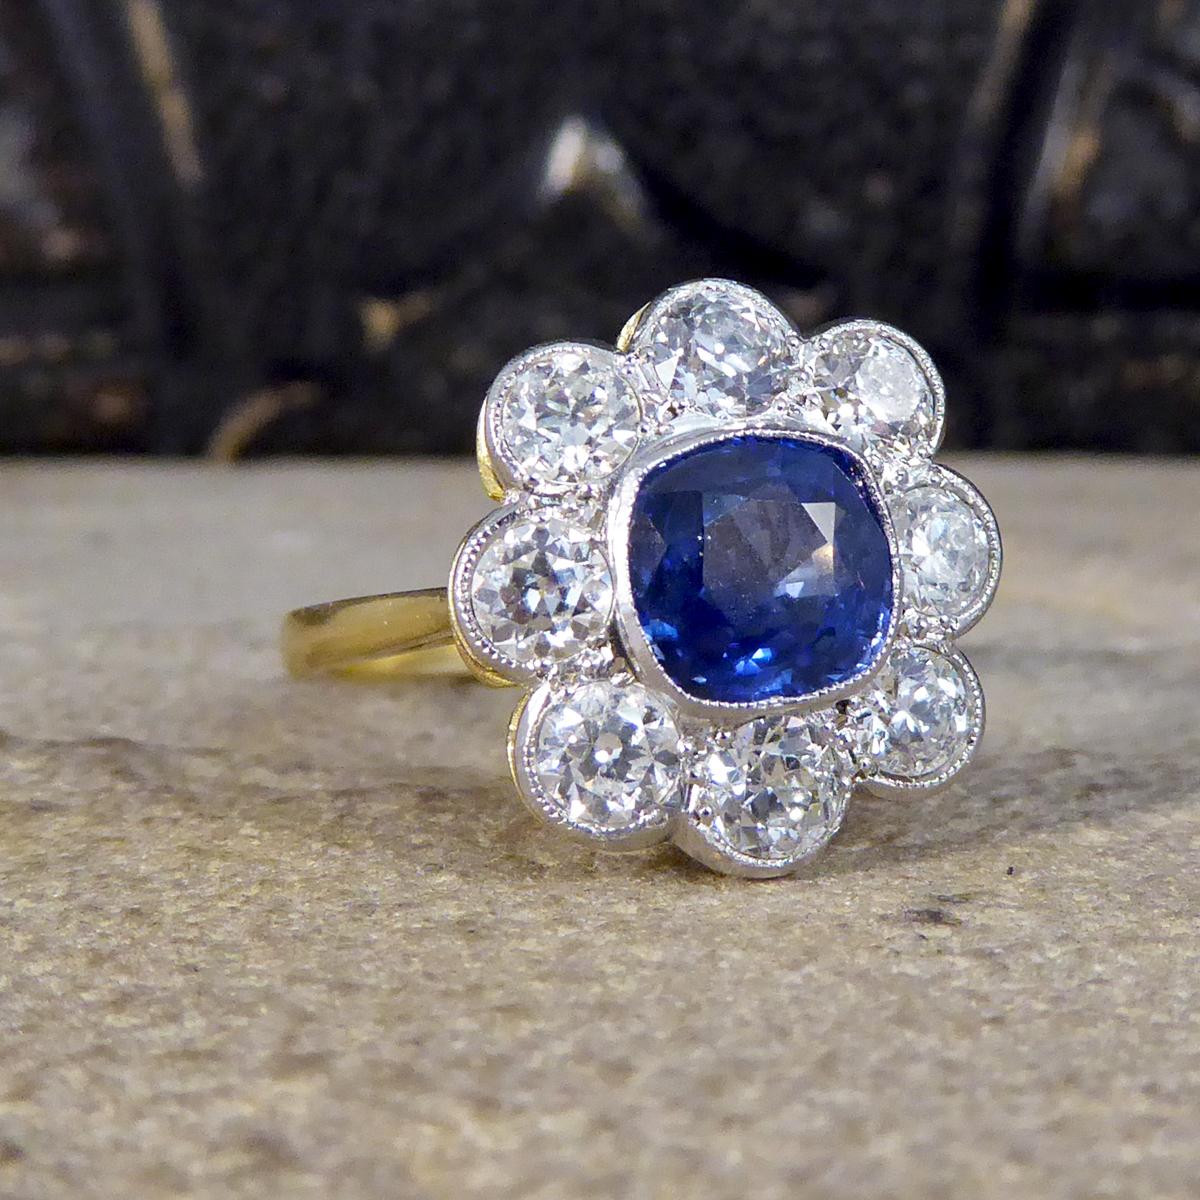 This gorgeous Sapphire and Diamond cluster ring has been crafted from 18ct White and Yellow Gold, with the White Gold on the surface complimenting the colour of the stones, leading to a full 18ct Yellow Gold band. Featuring a 1.40ct beautiful bright